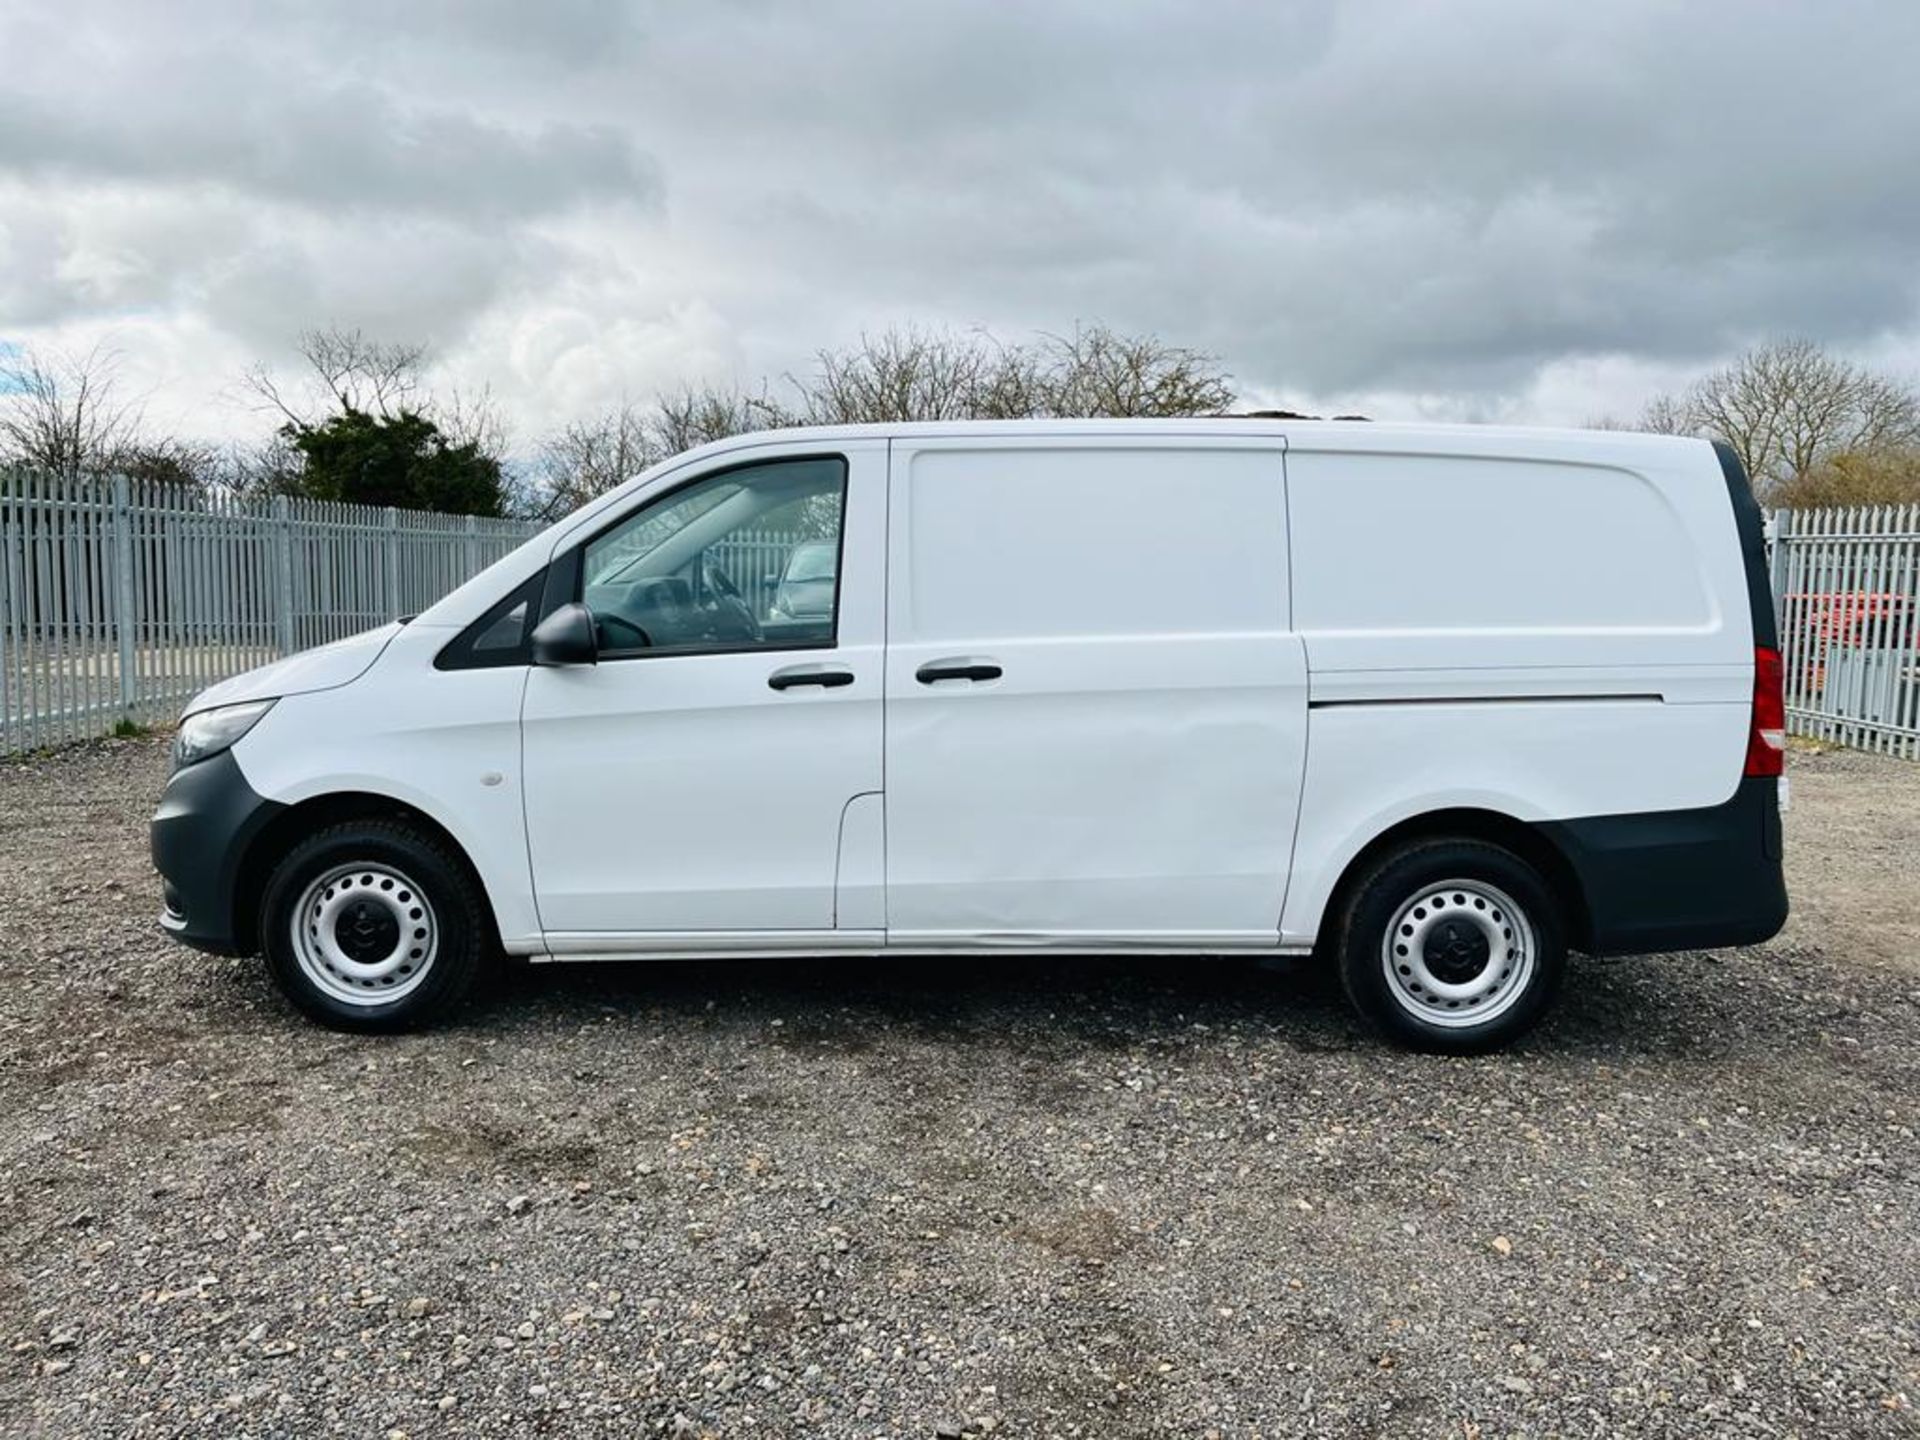 Mercedes Benz Vito 1.6 111 CDI FWD 2019 '19 Reg' - ULEZ Compliant - Only 85,733 Miles - Image 4 of 24